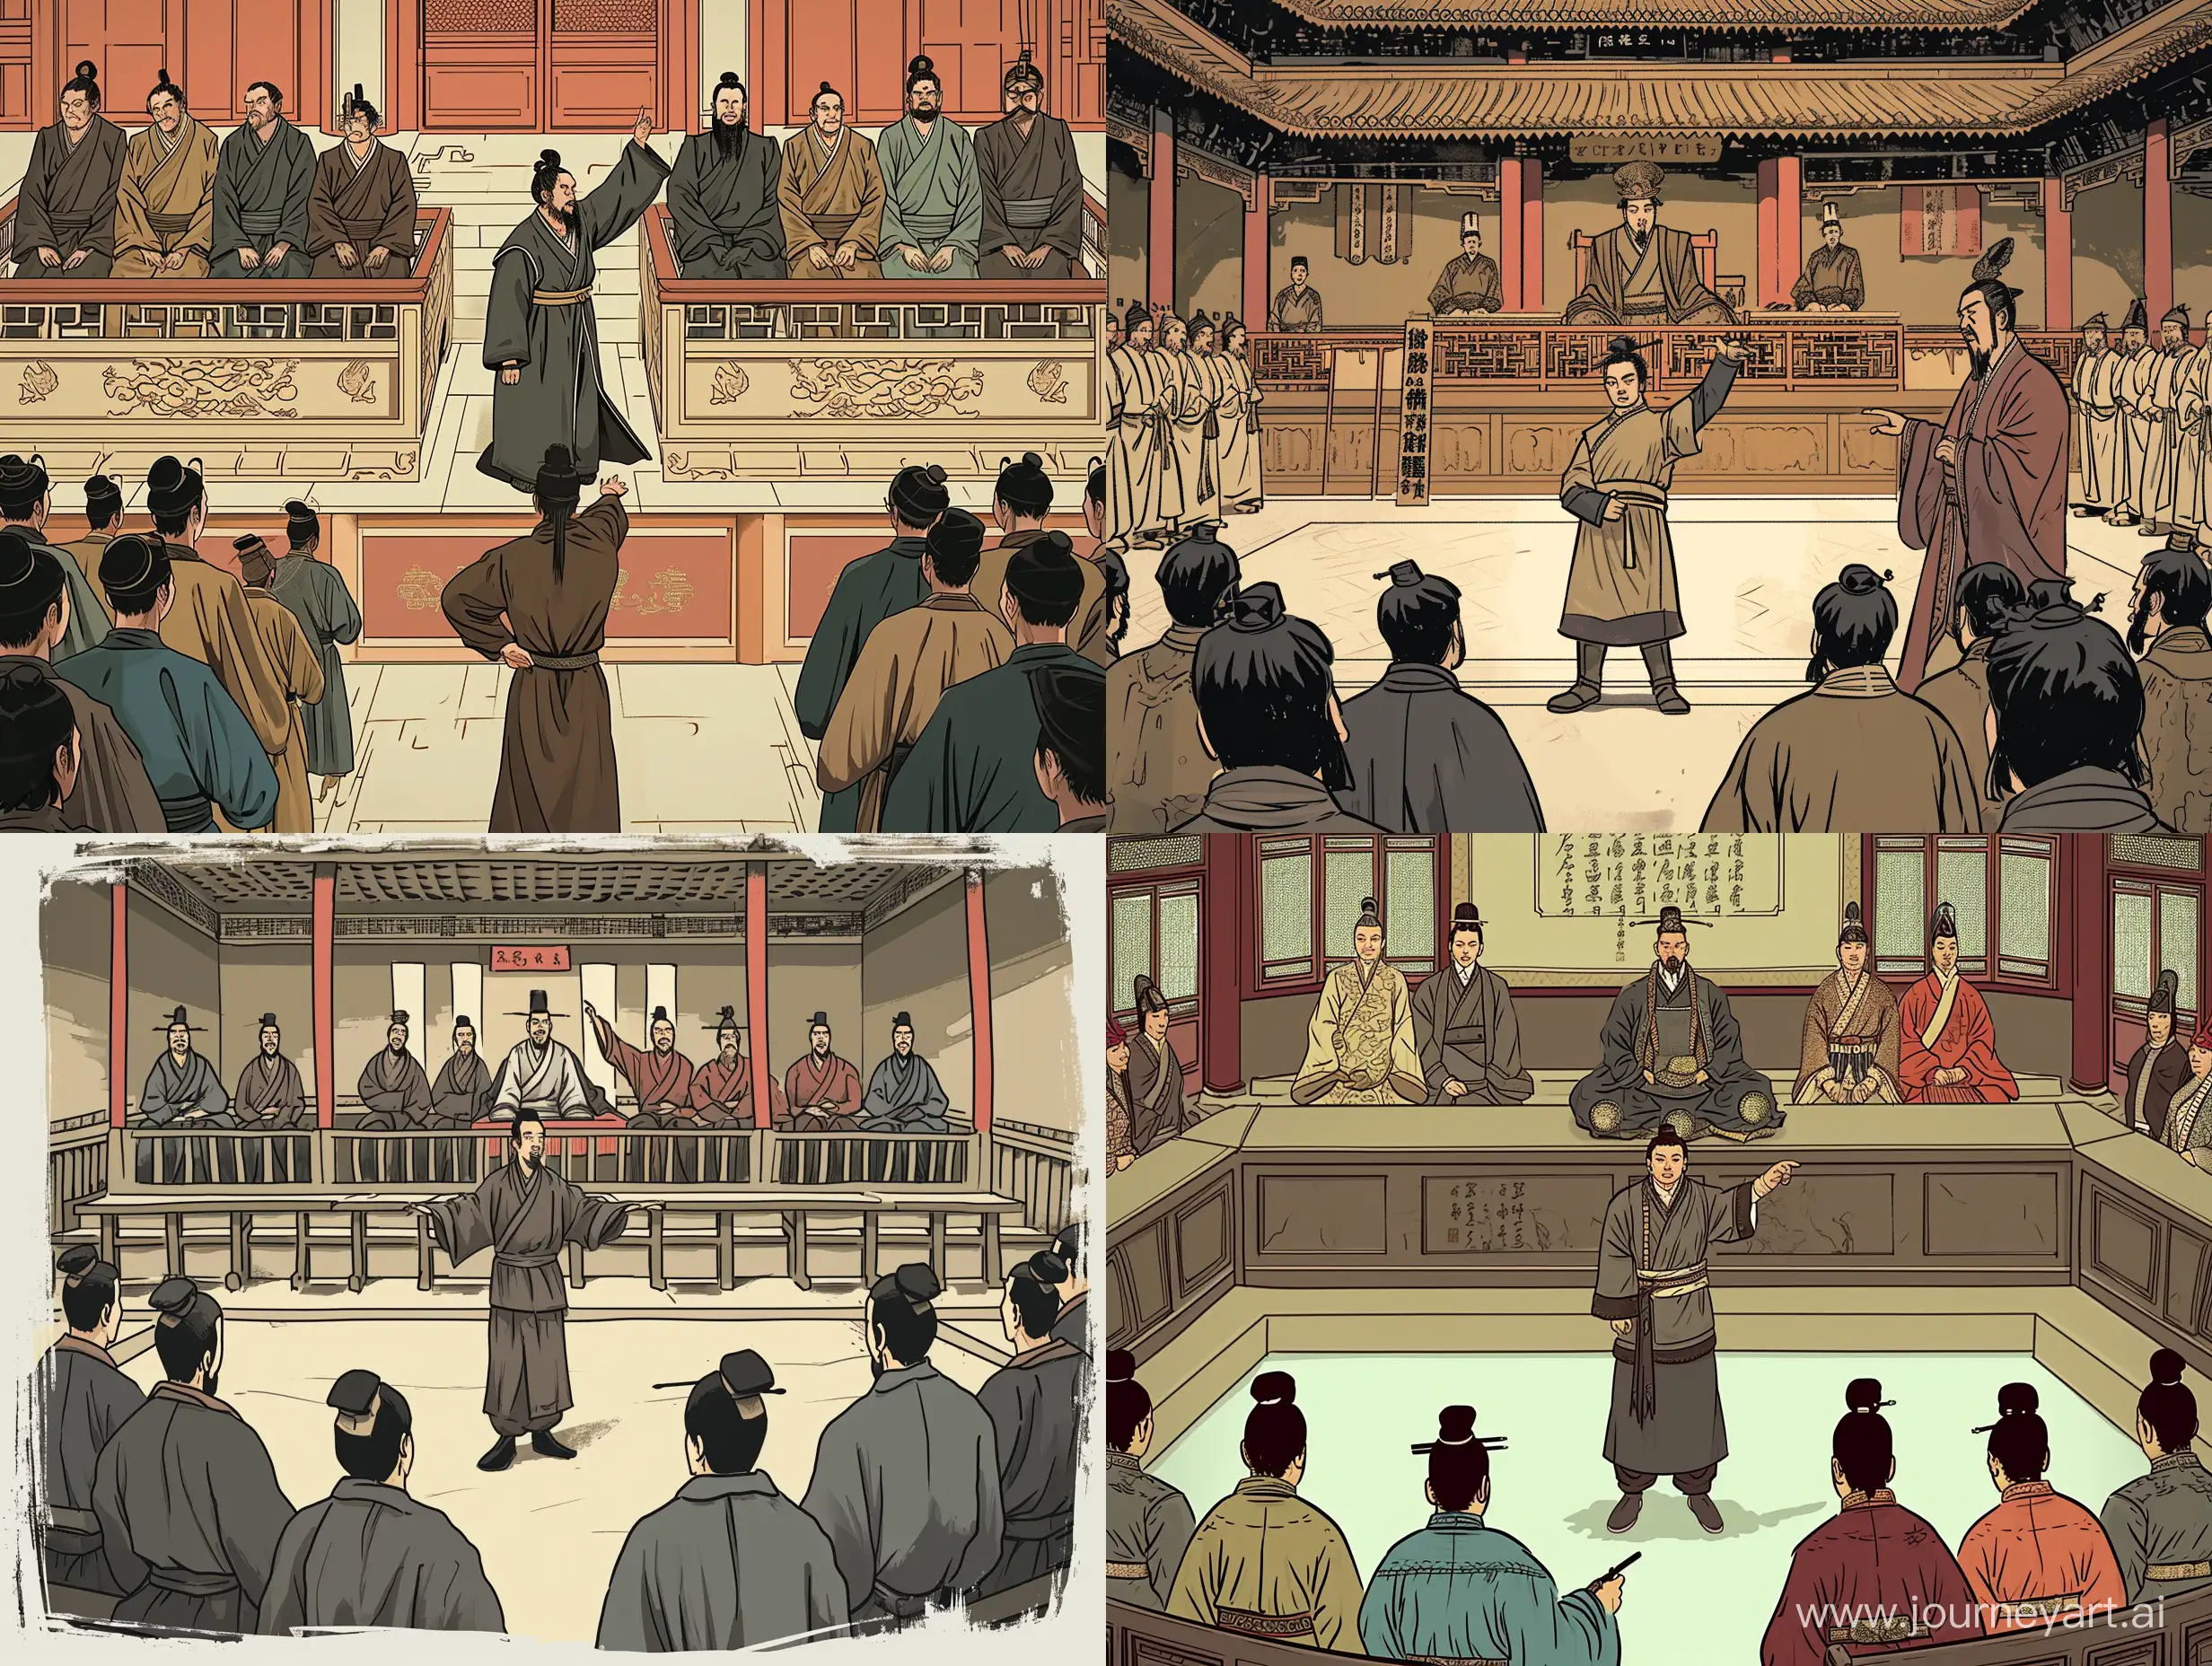 Emperor-and-Ministers-in-Majestic-Chinese-Court-Illustration